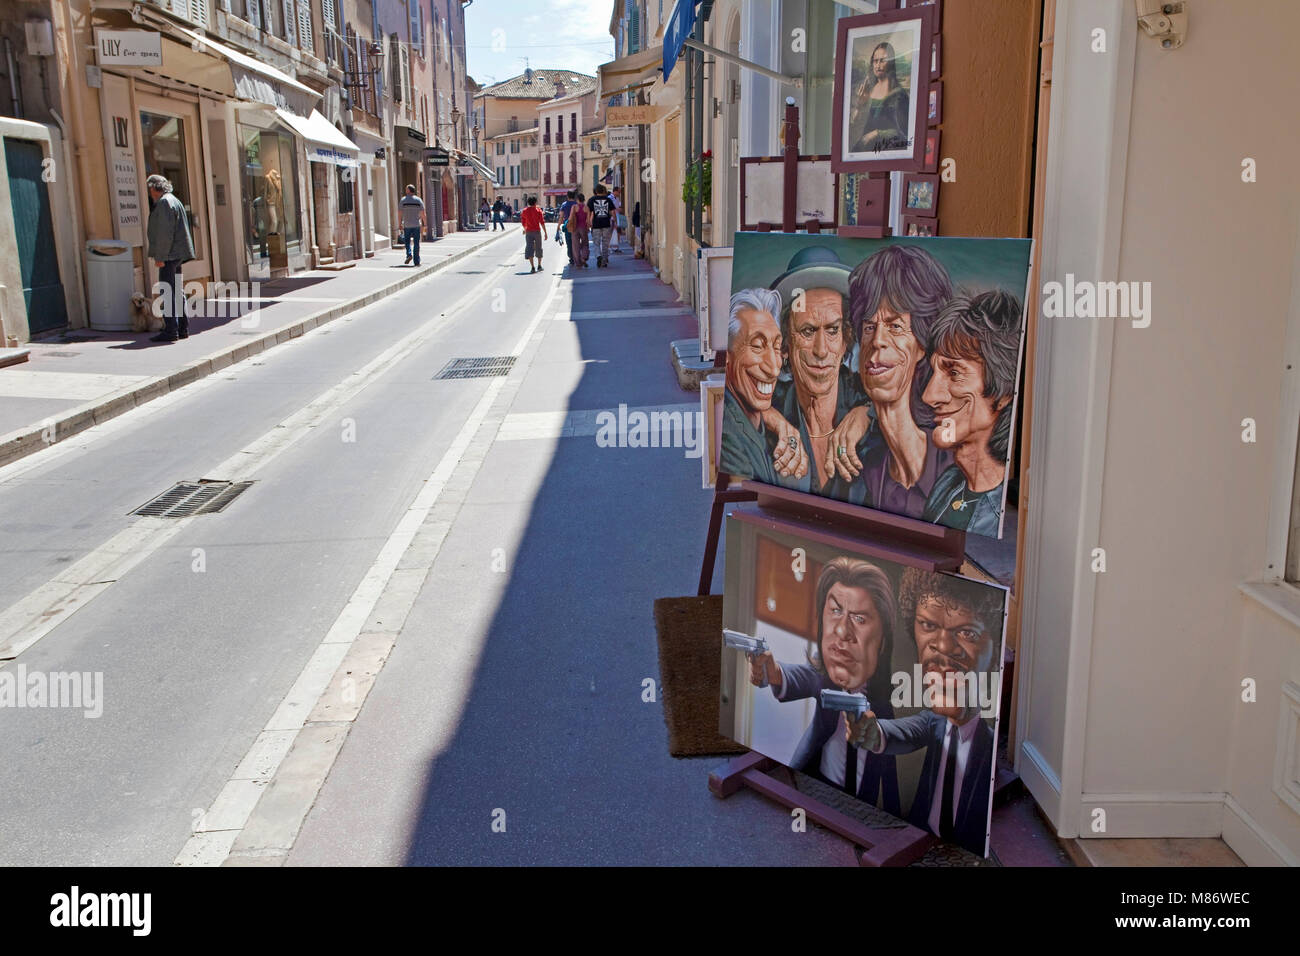 Caricature of the Rolling at a art gallery, old town of Saint-Tropez, french riviera, South France, Cote d'Azur, France, Europe Stock Photo